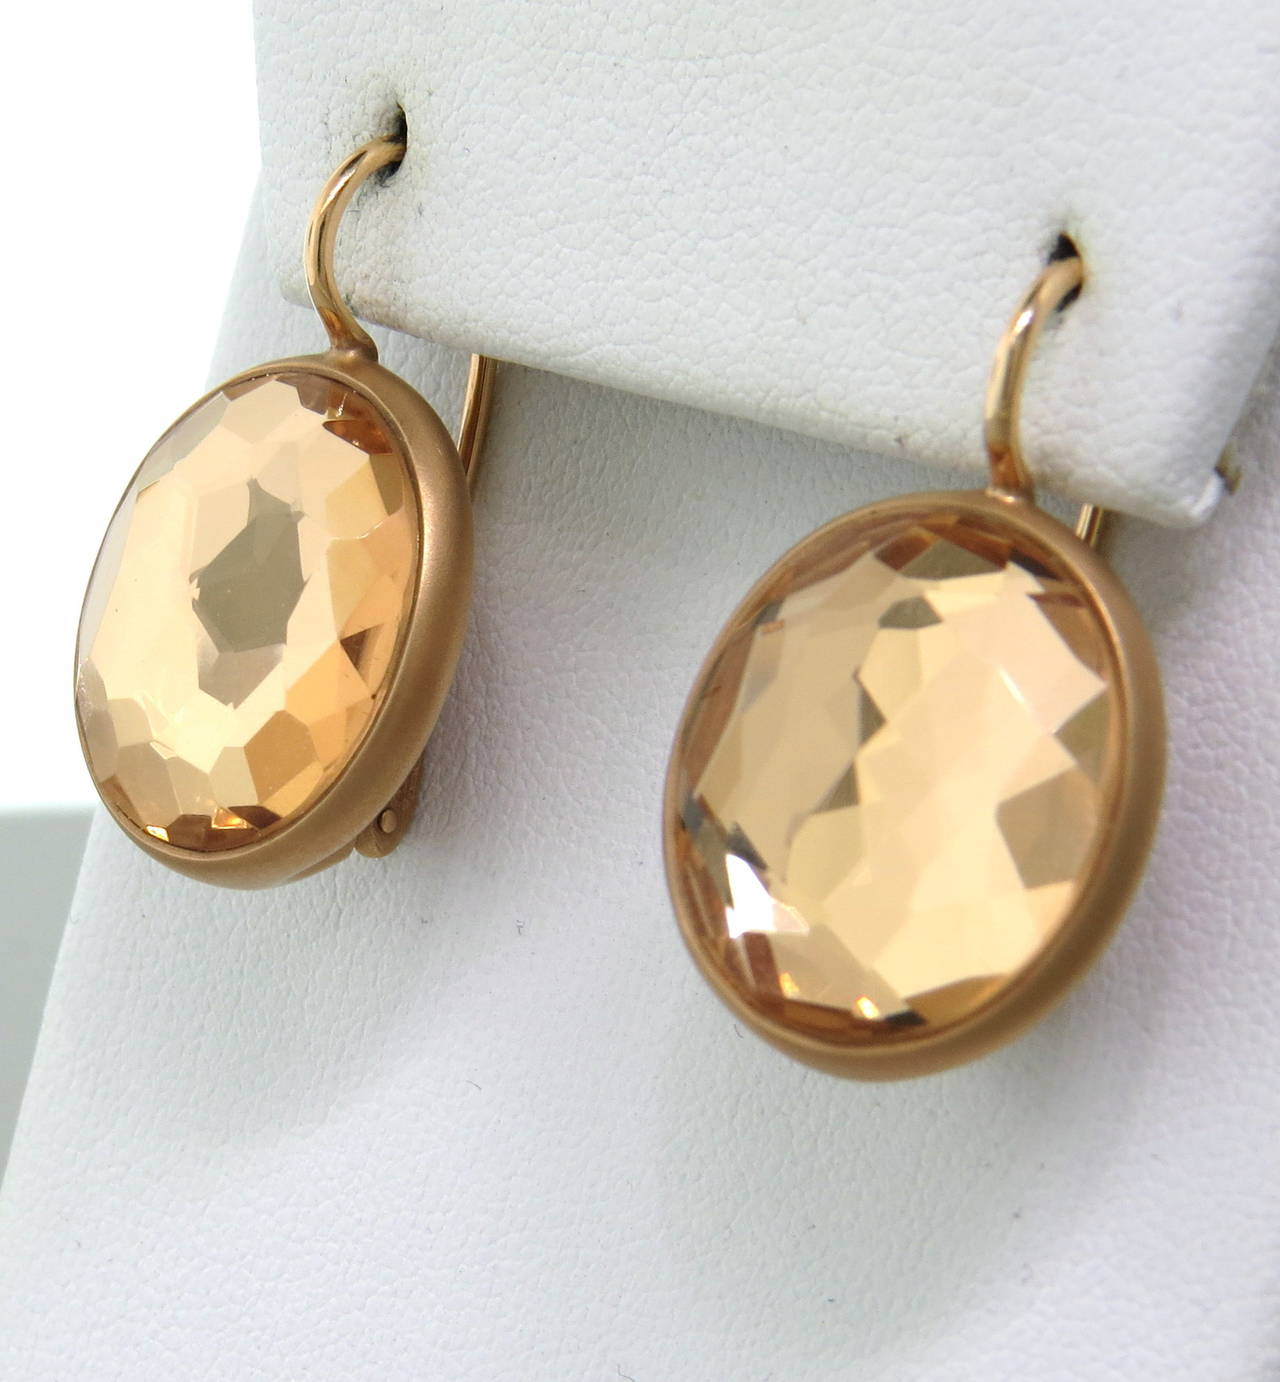 New Pomellato 18k gold earrings with rock crystal from Narciso collection. Earrings measure 30mm long with wires x 18mm wide. weight - 15.5gr
Retail $5150